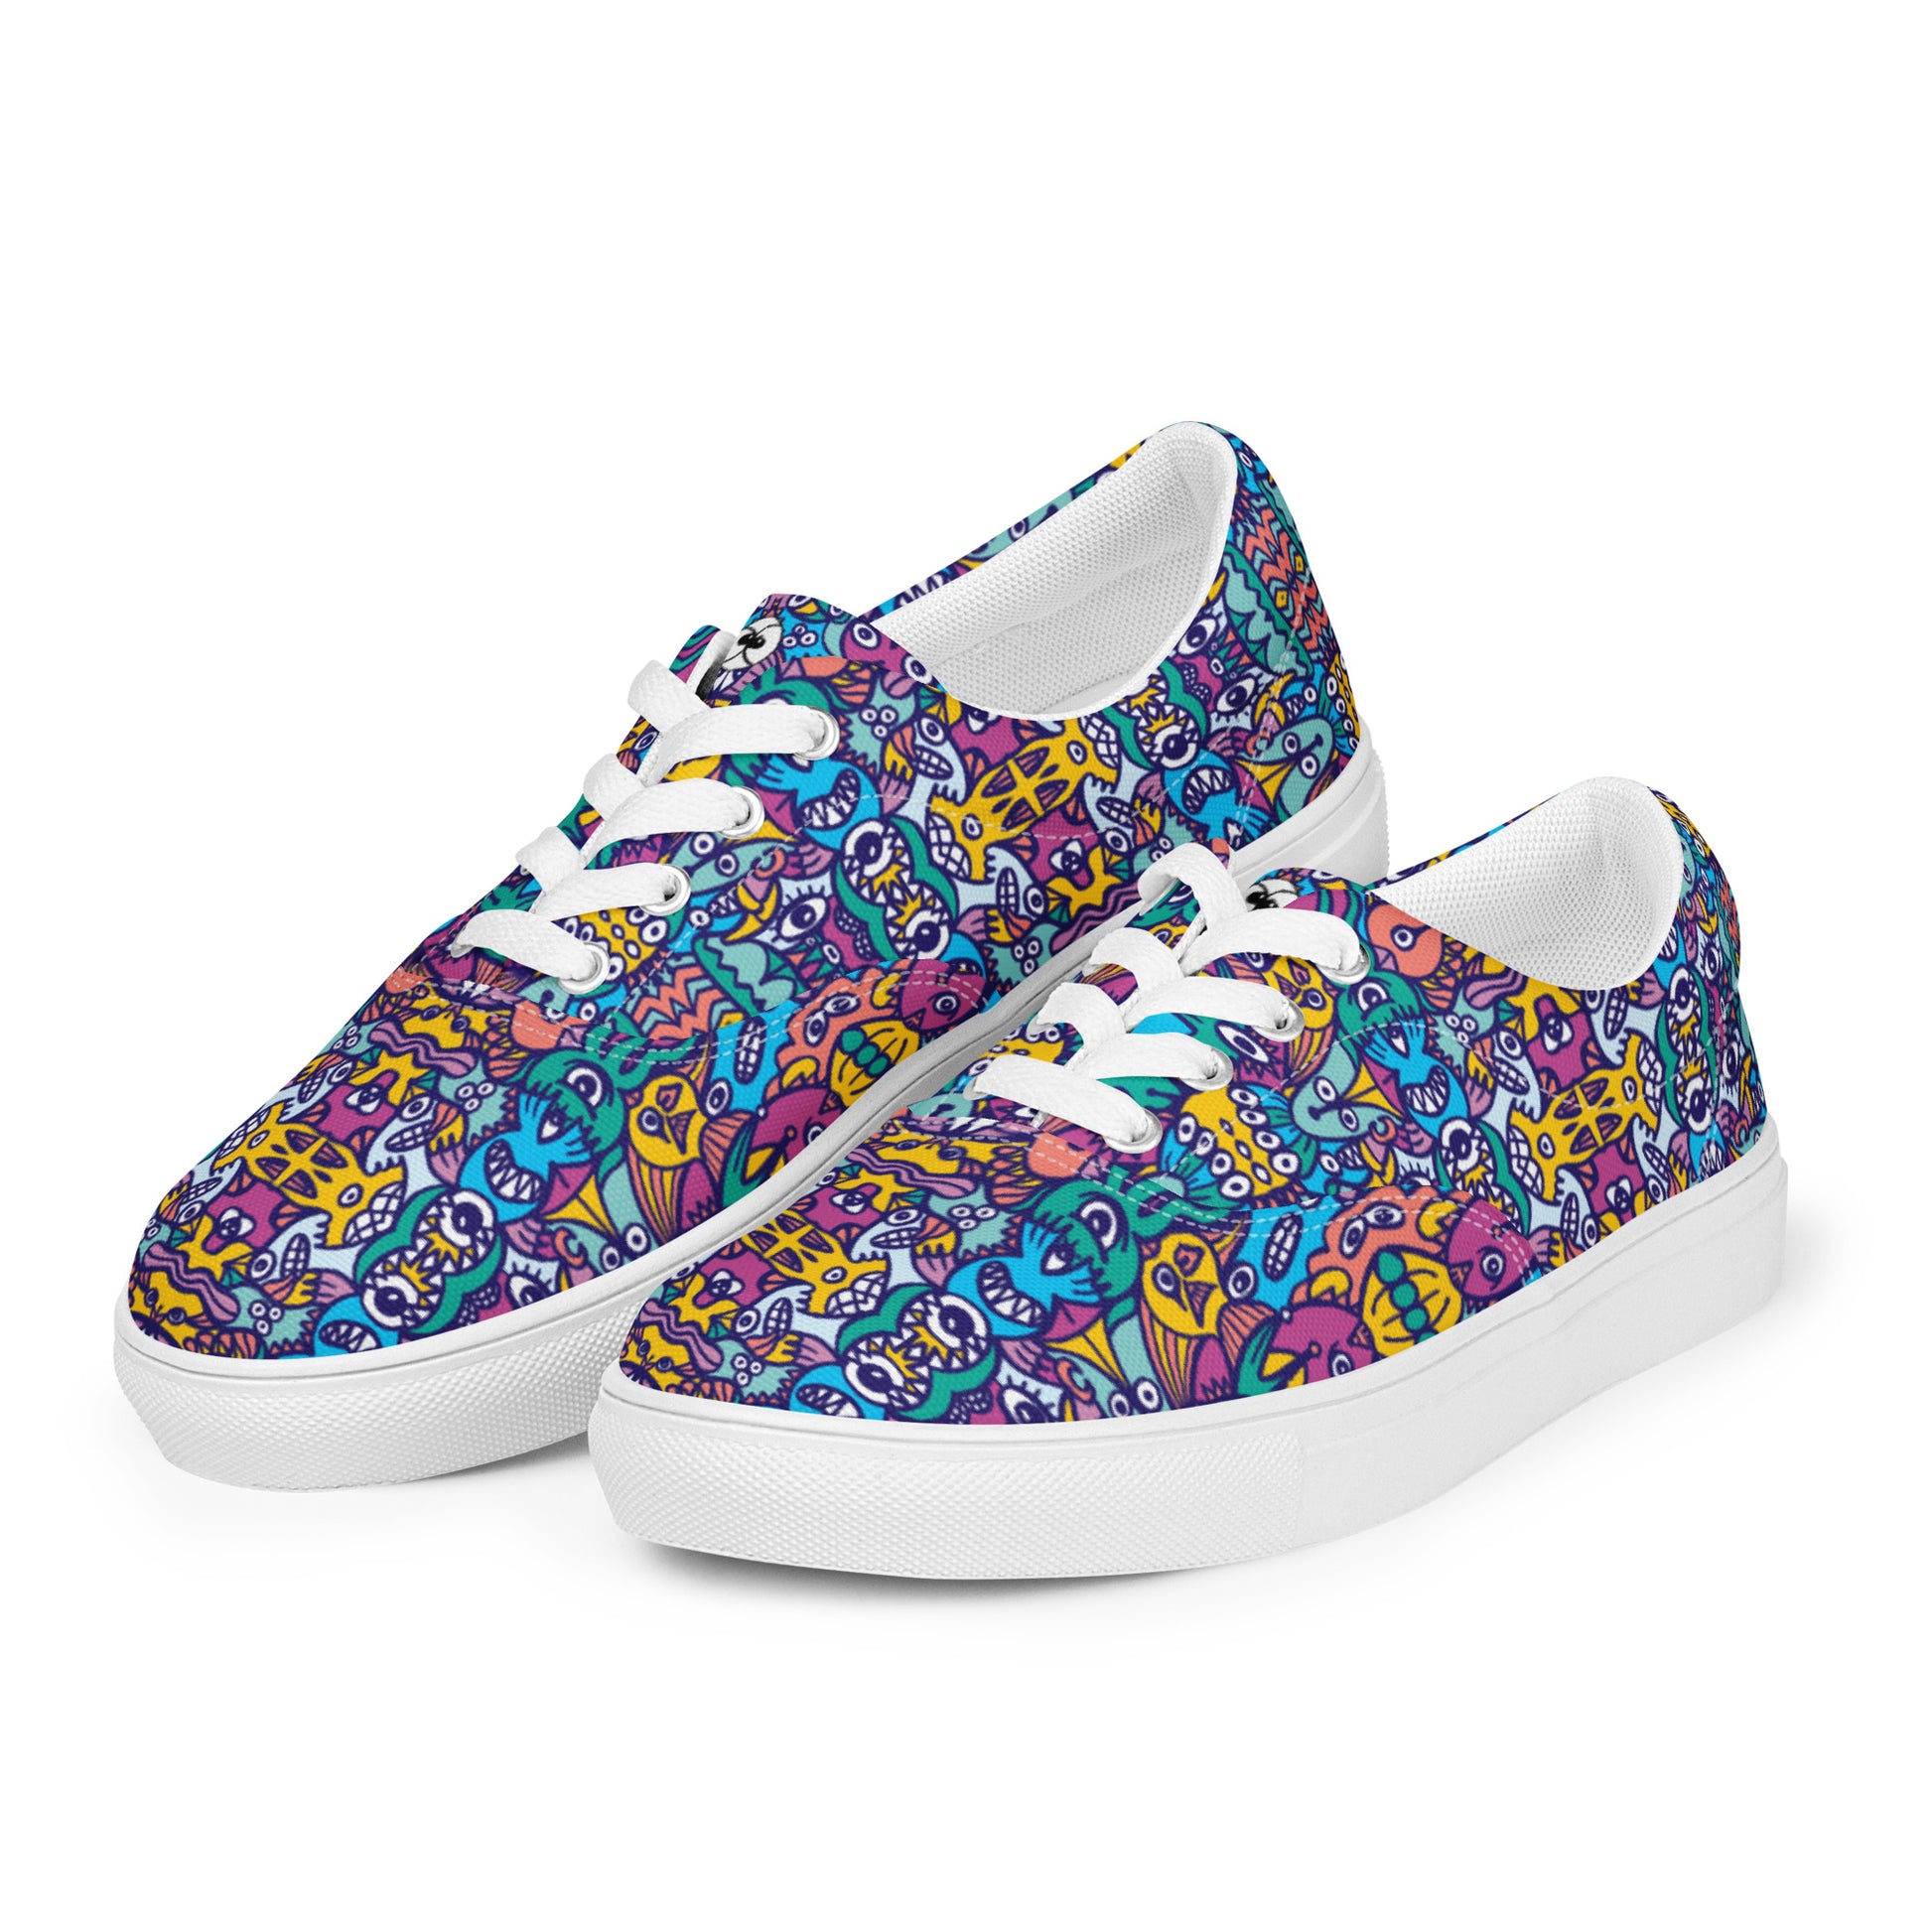 Whimsical design featuring multicolor critters from another world Women’s lace-up canvas shoes. Playing with shoes